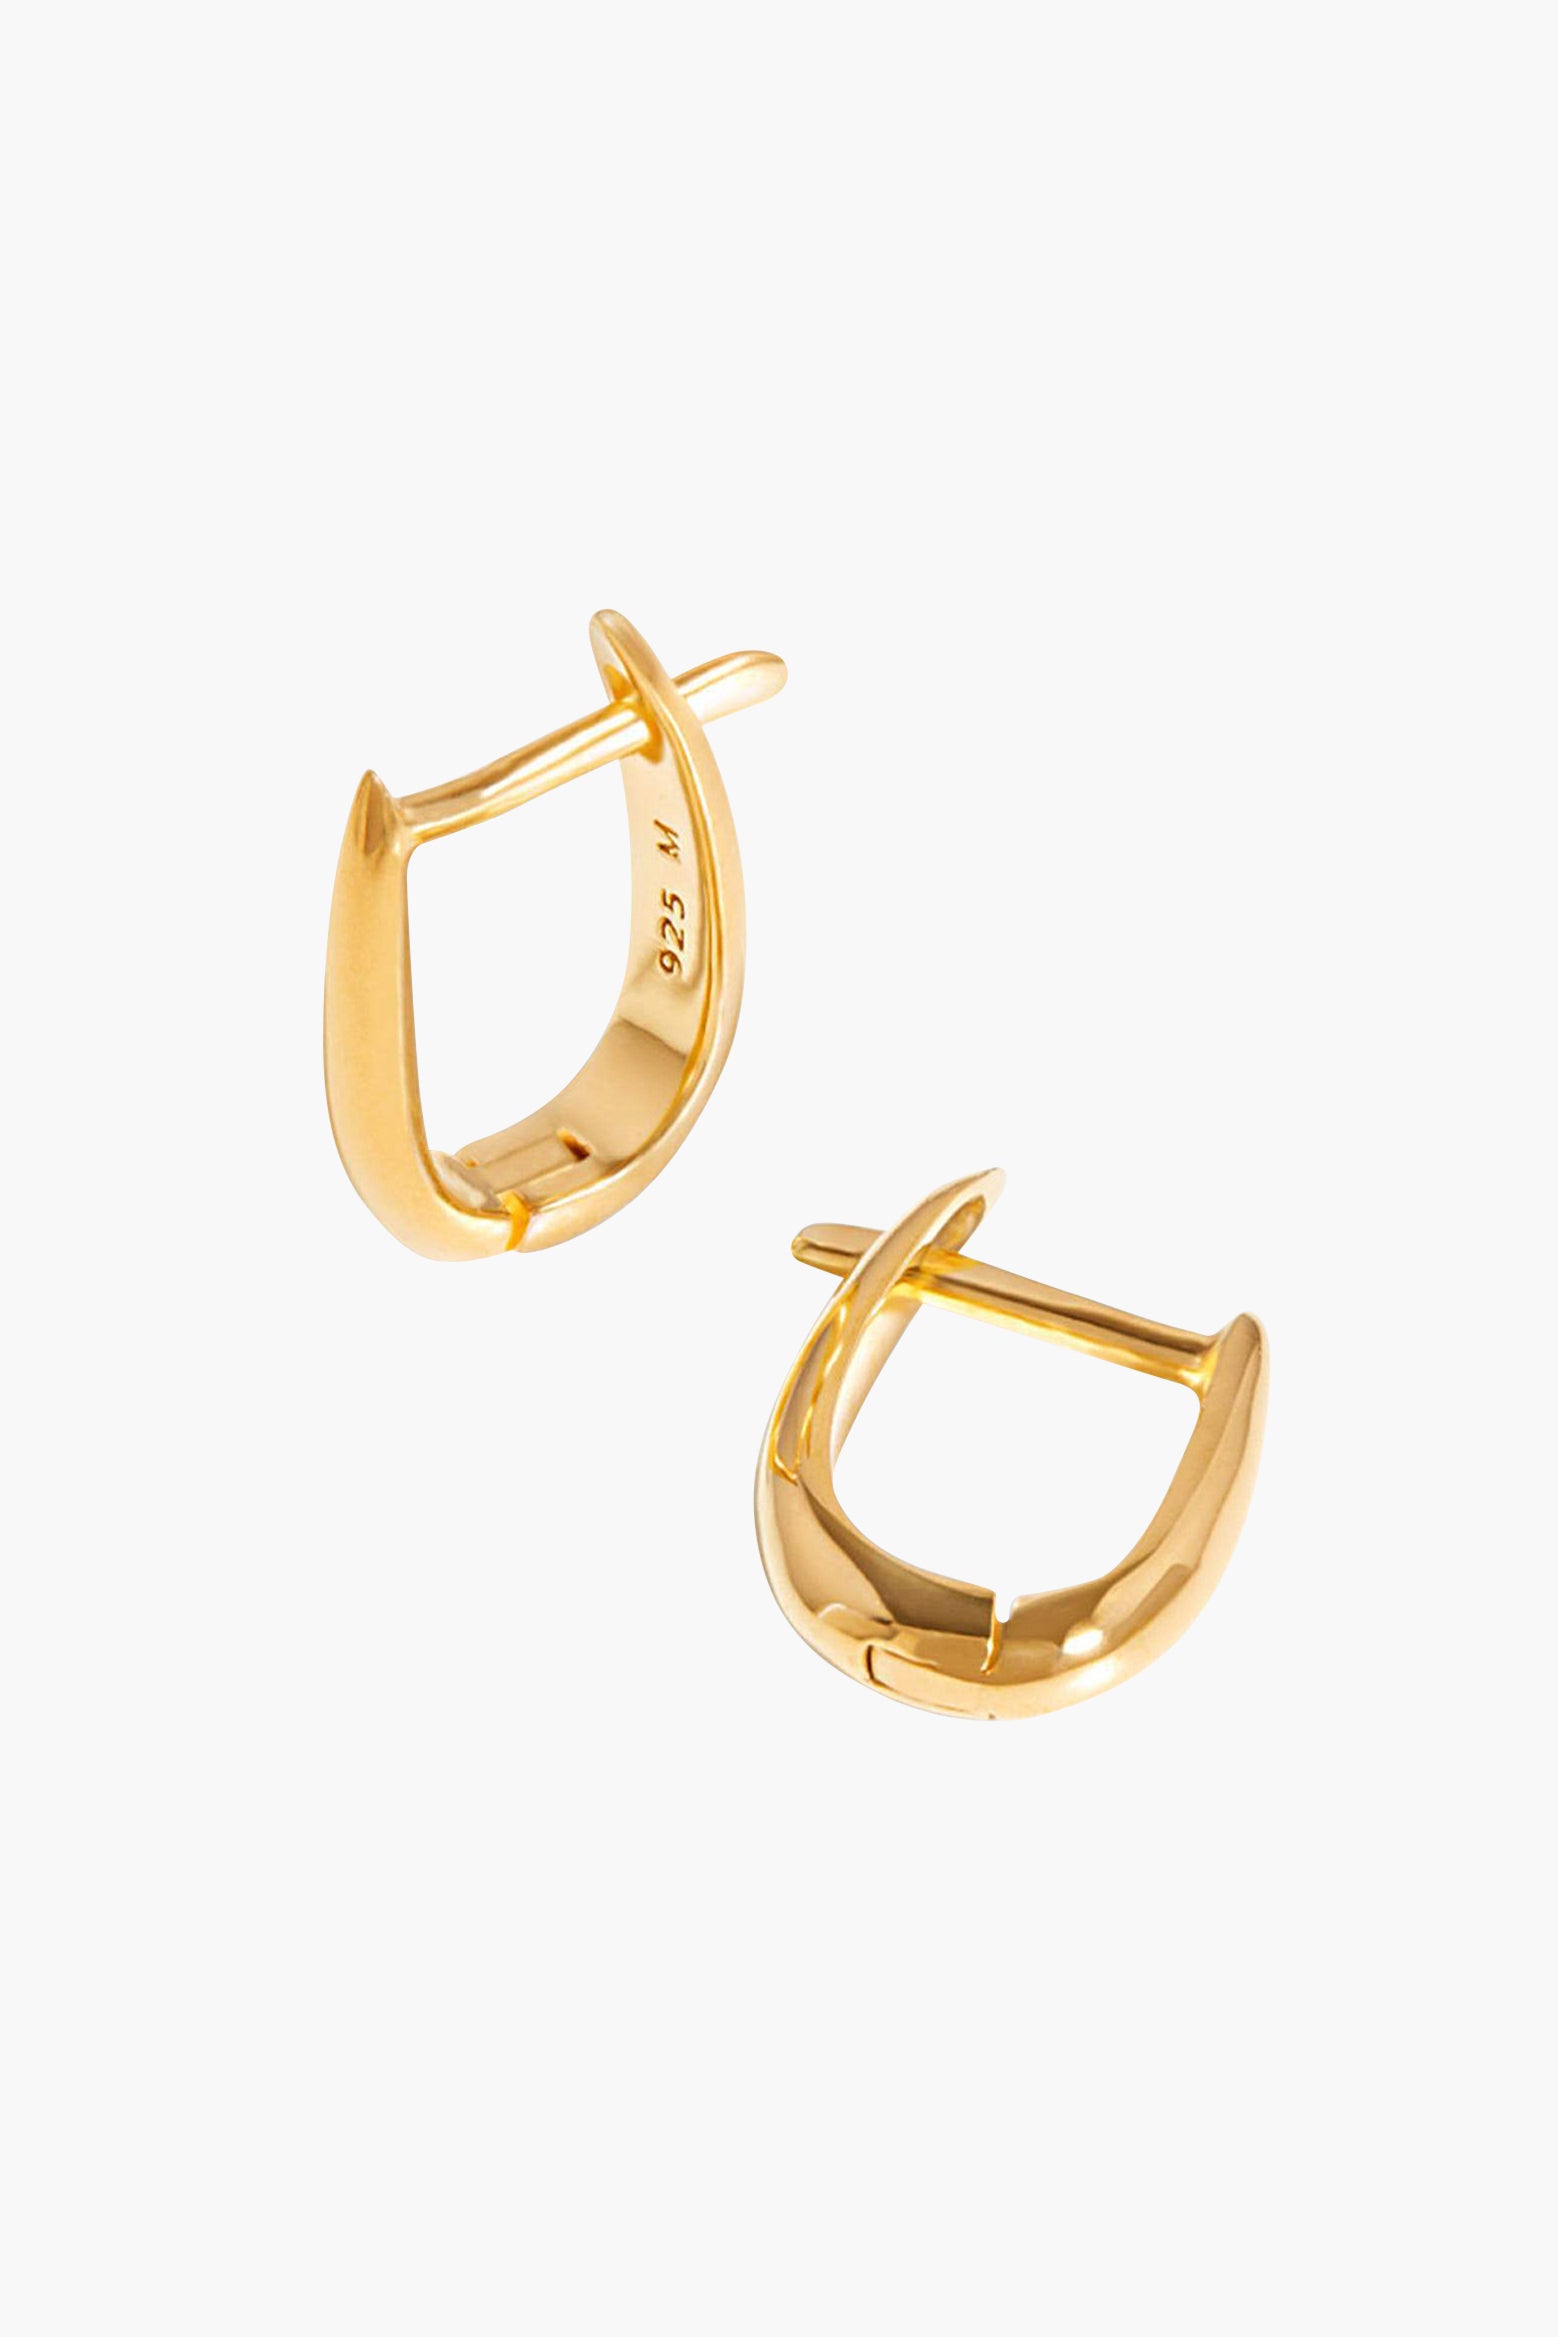 Missoma Gold Plain Claw Huddies. Shop Missoma at The New Trend. Free Shipping over $300 AUD.